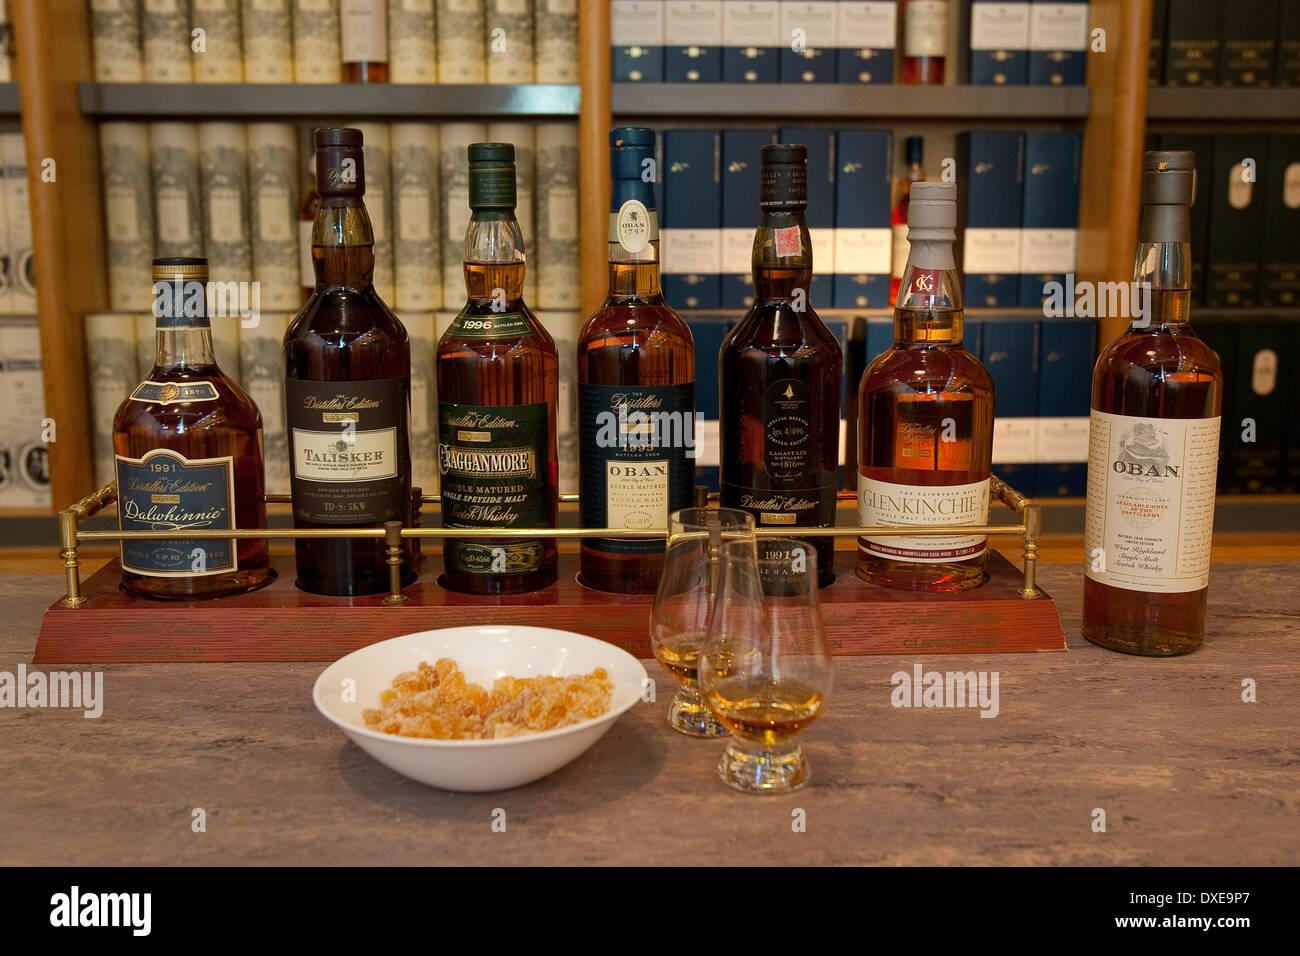 bottles of scotch whiskies of the diageo group. Stock Photo